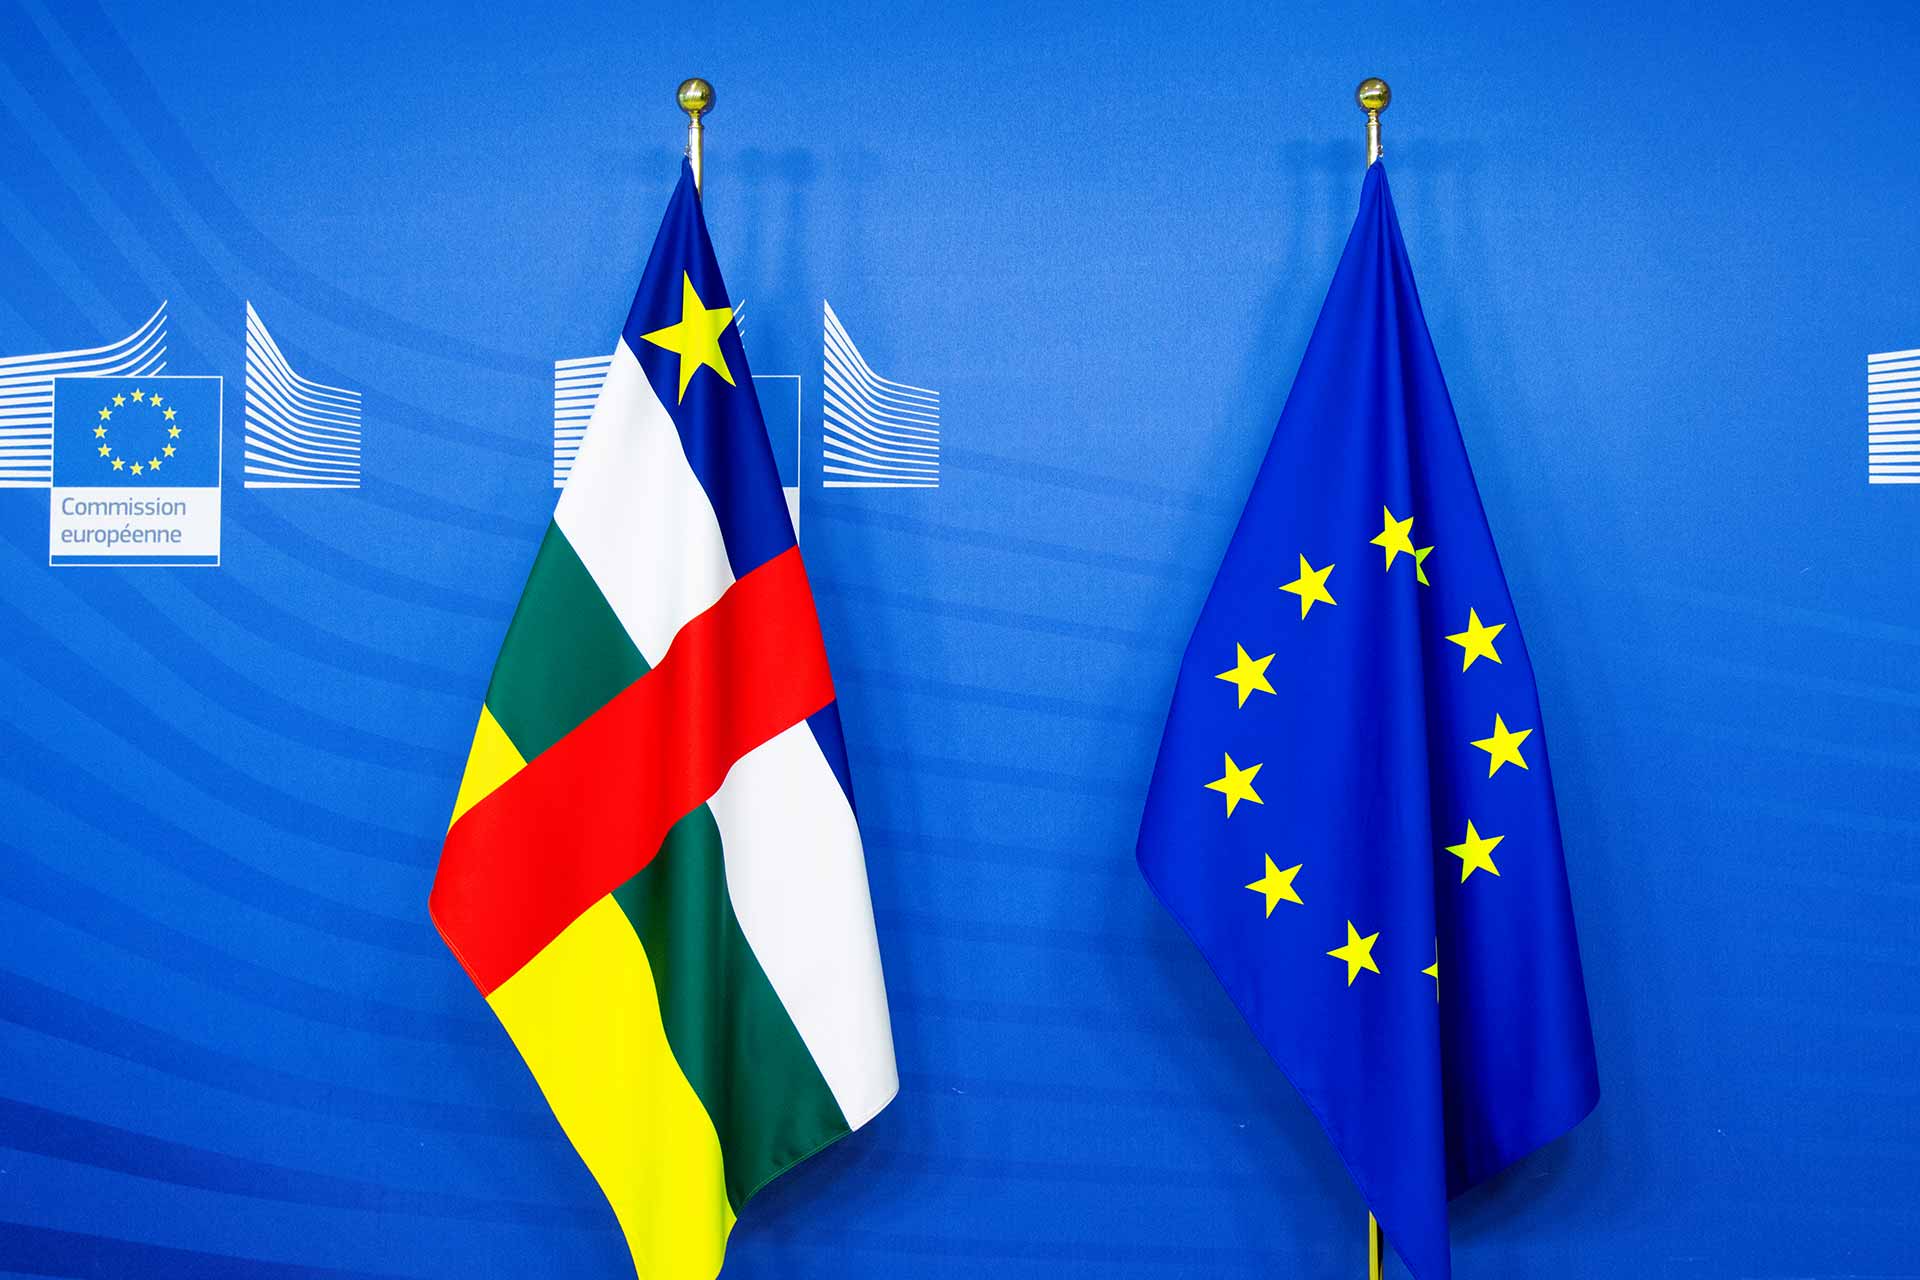 Flags of the European Union and the Central African Republic CAR